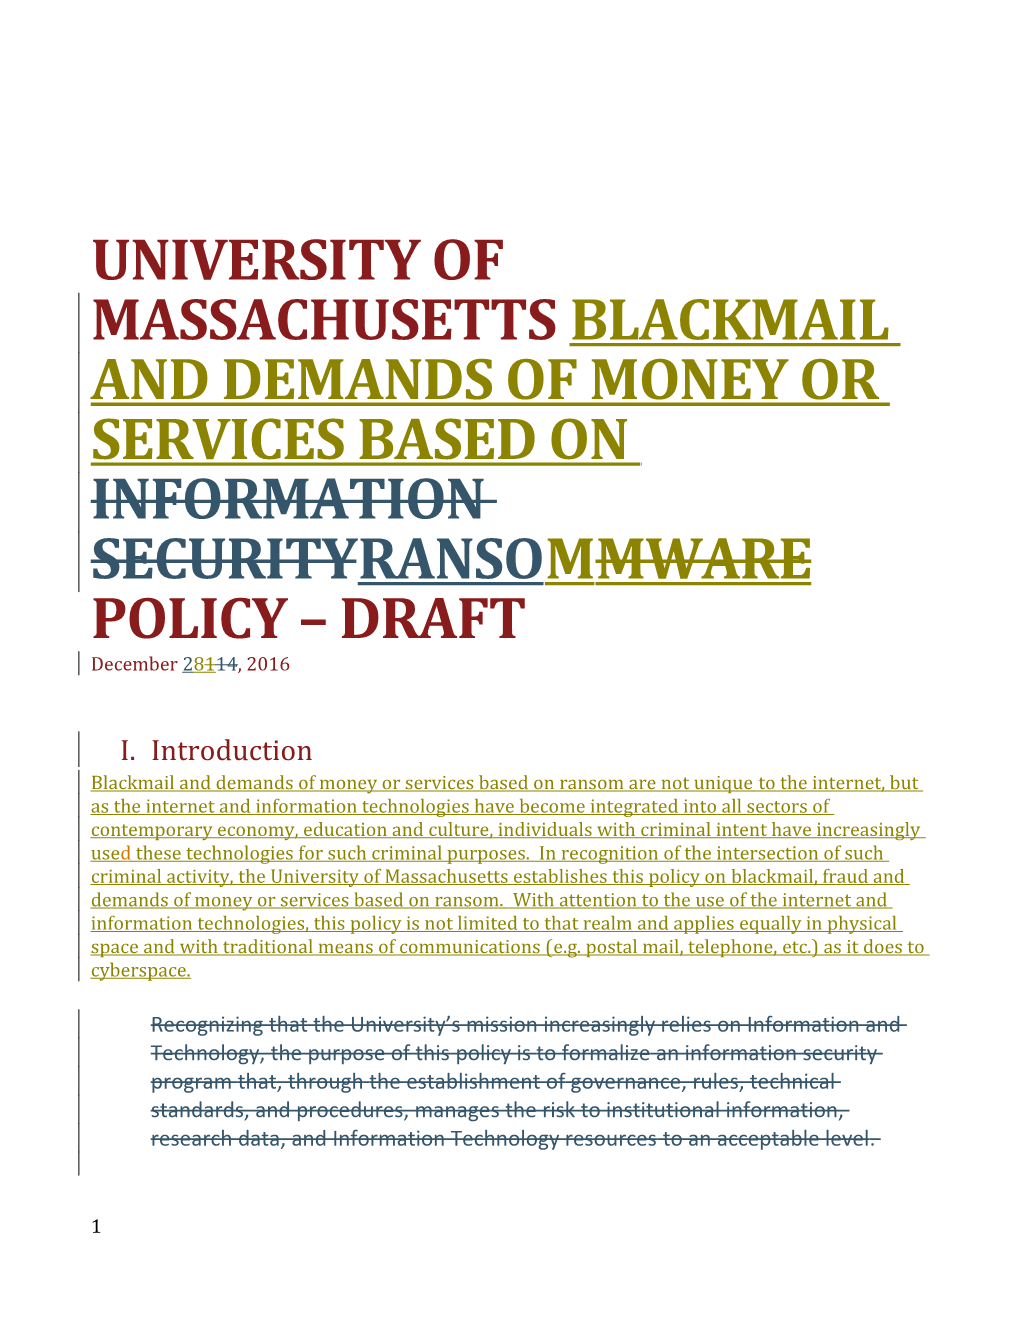 University of Massachusetts Blackmail and Demands of Money Or Services Based on Information